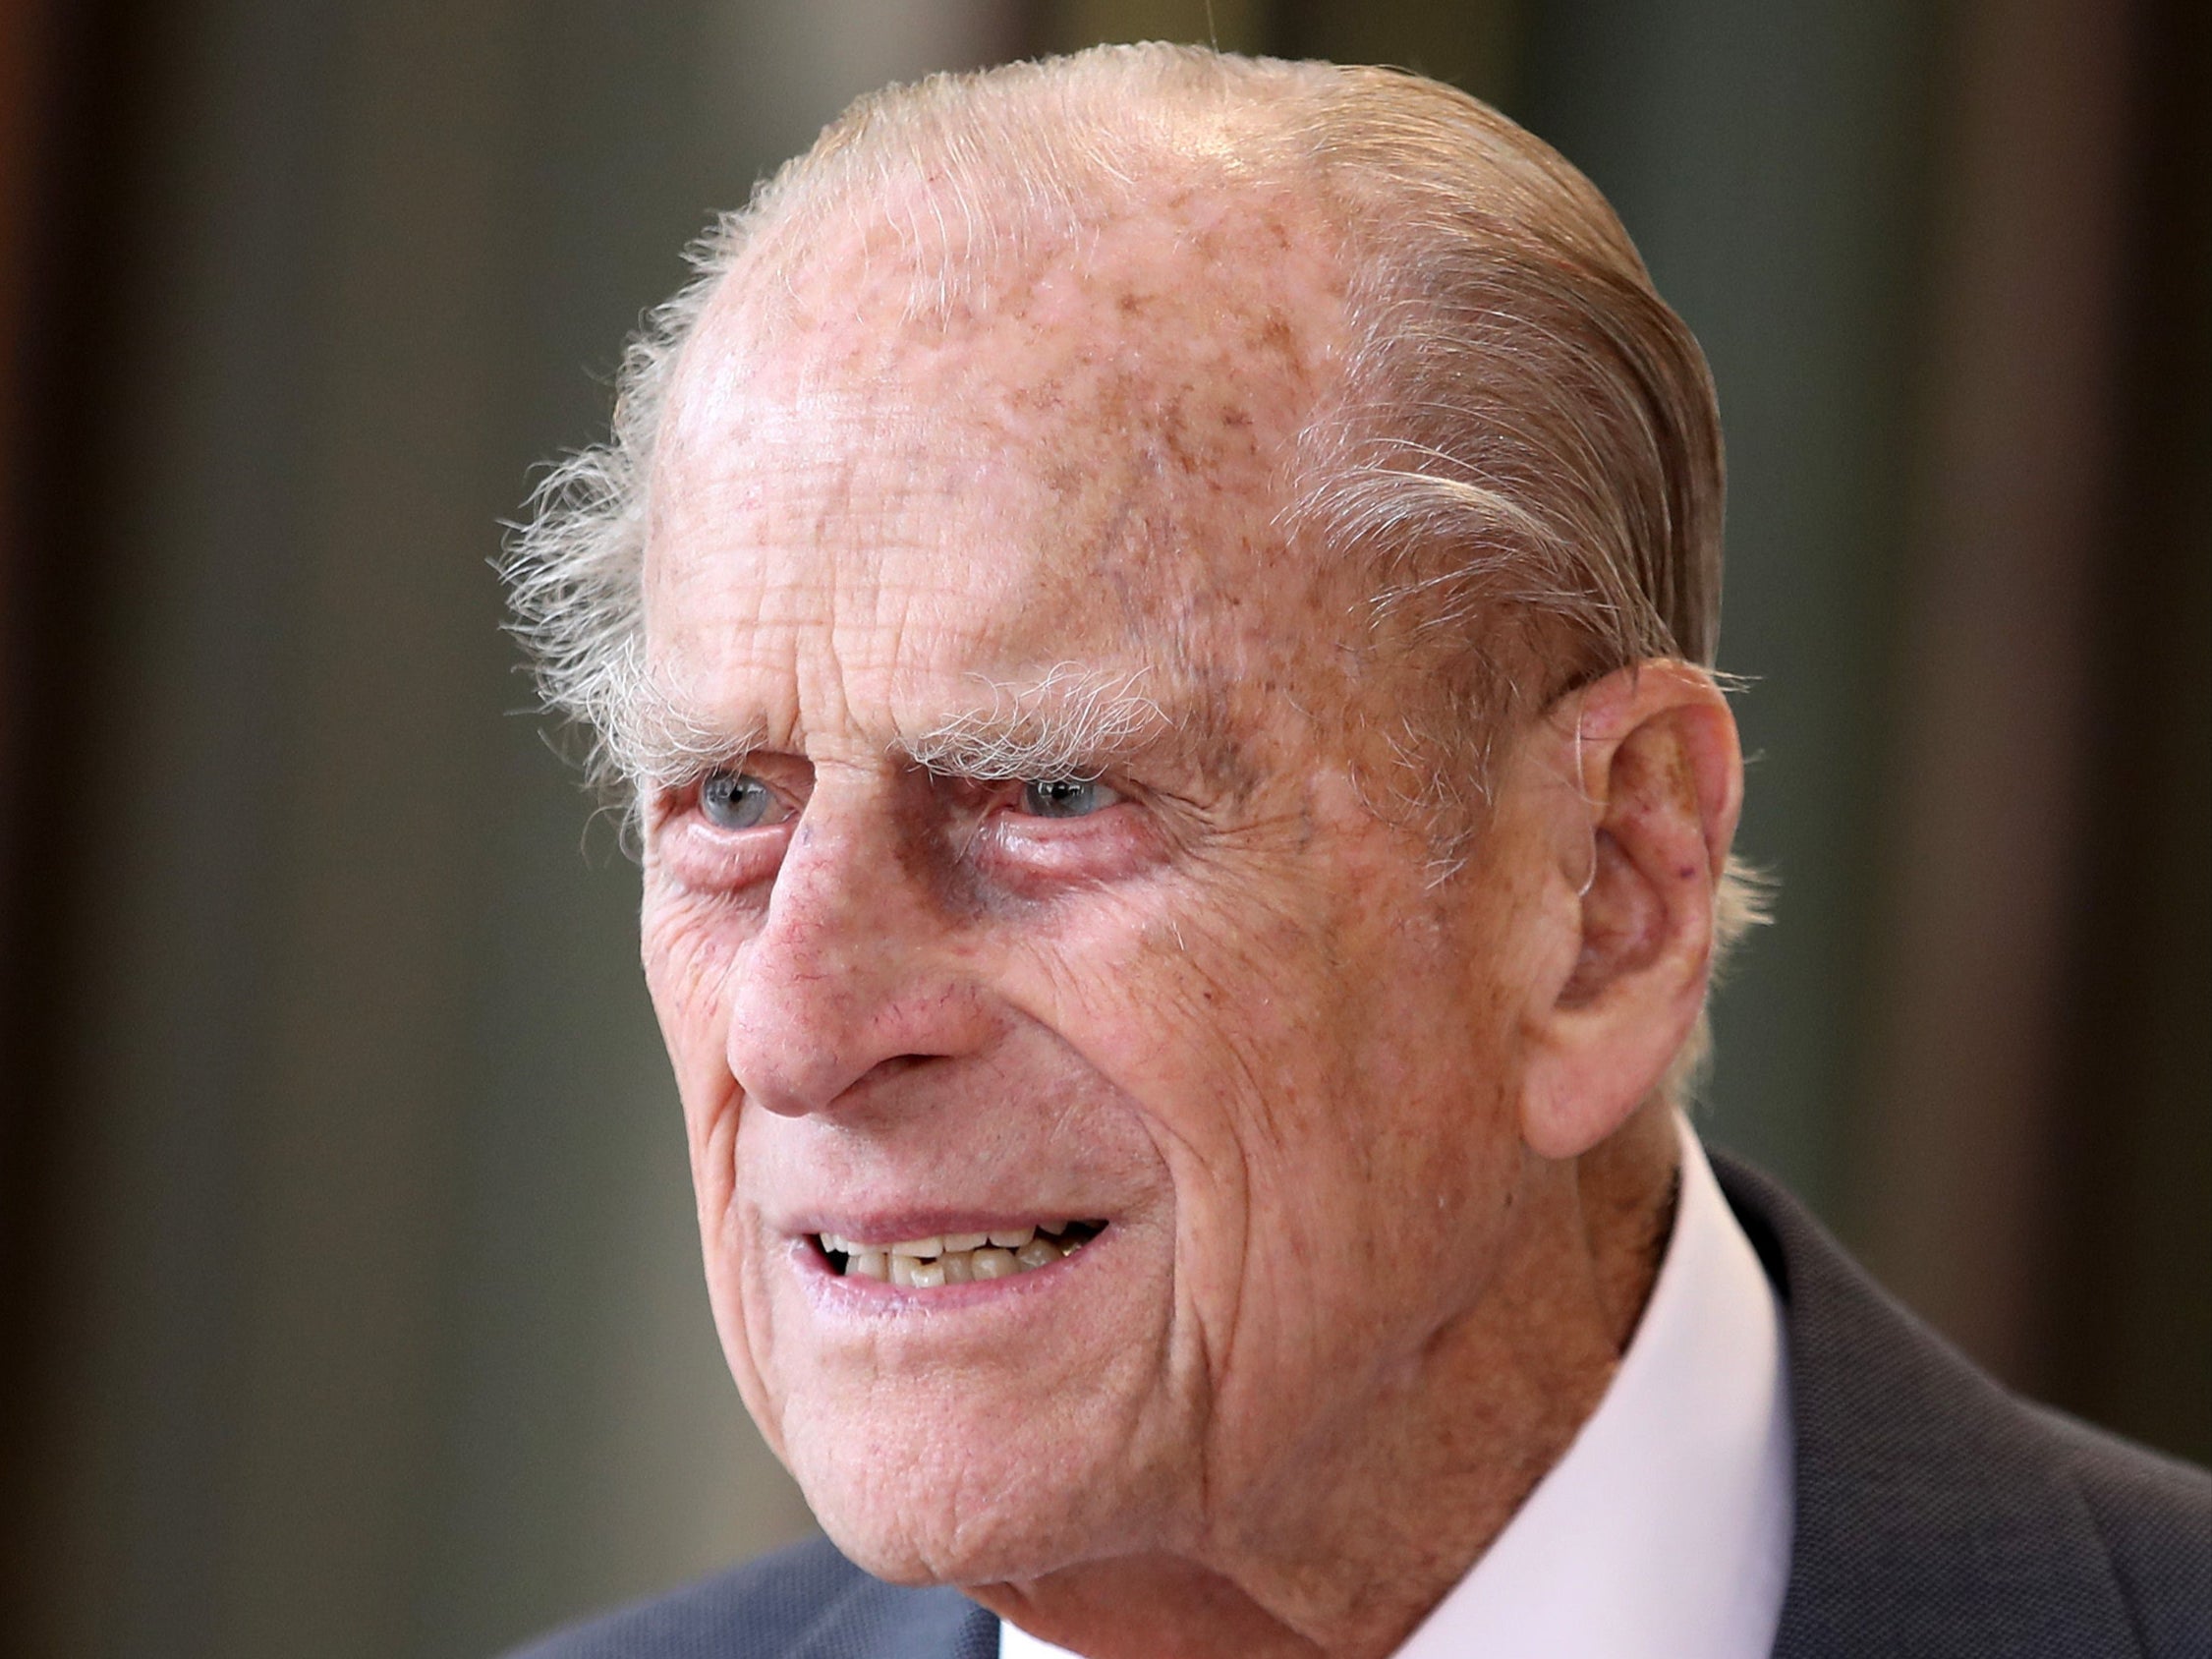 Prince Philip has been transferred to St Bartholomew’s Hospital in London